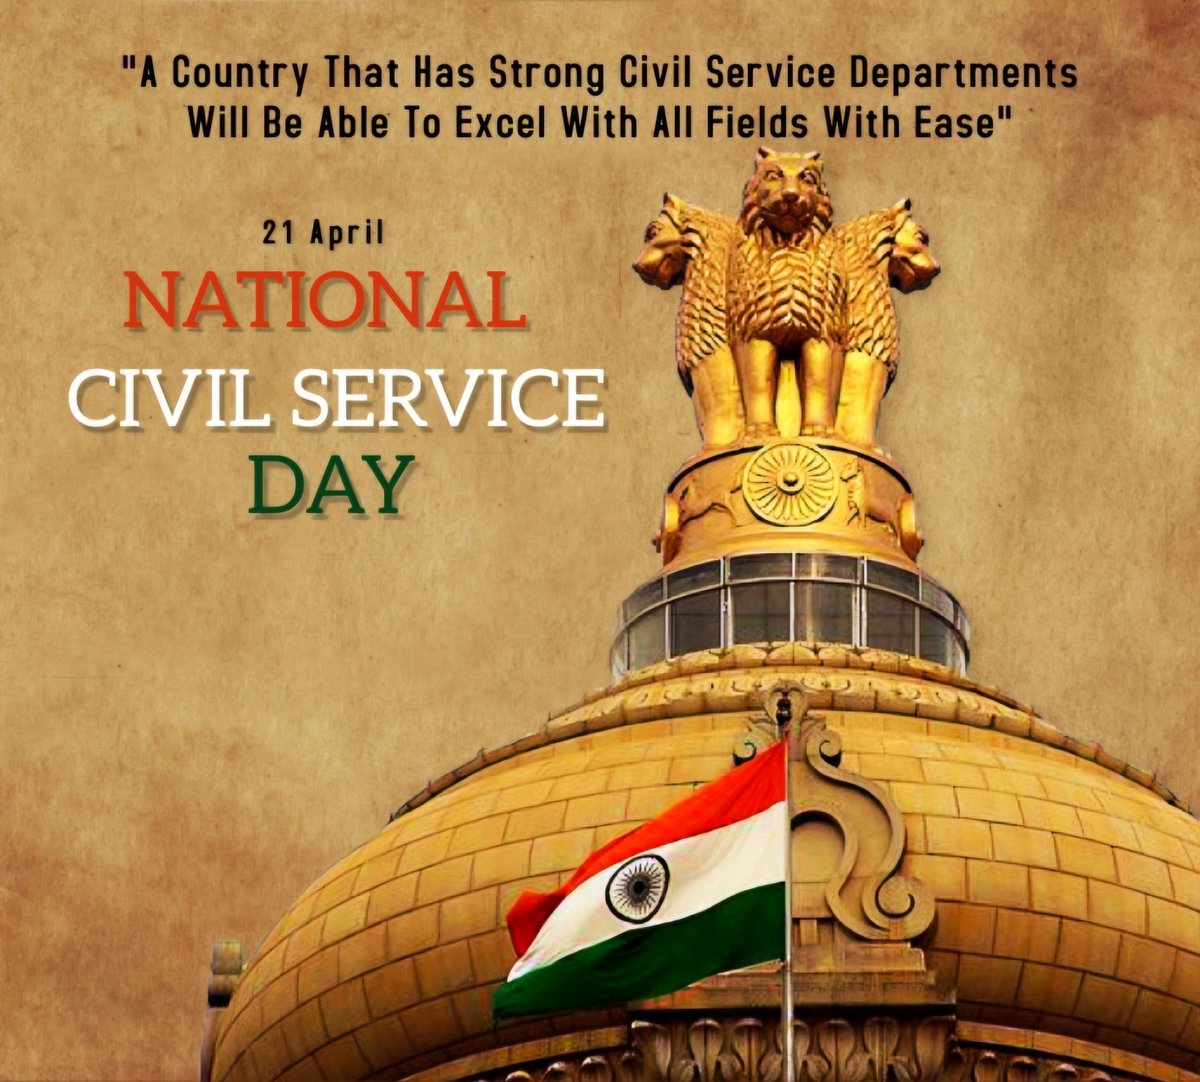 Years roll by, but the dent you make as a civil servant is what matters. #CivilServiceDay